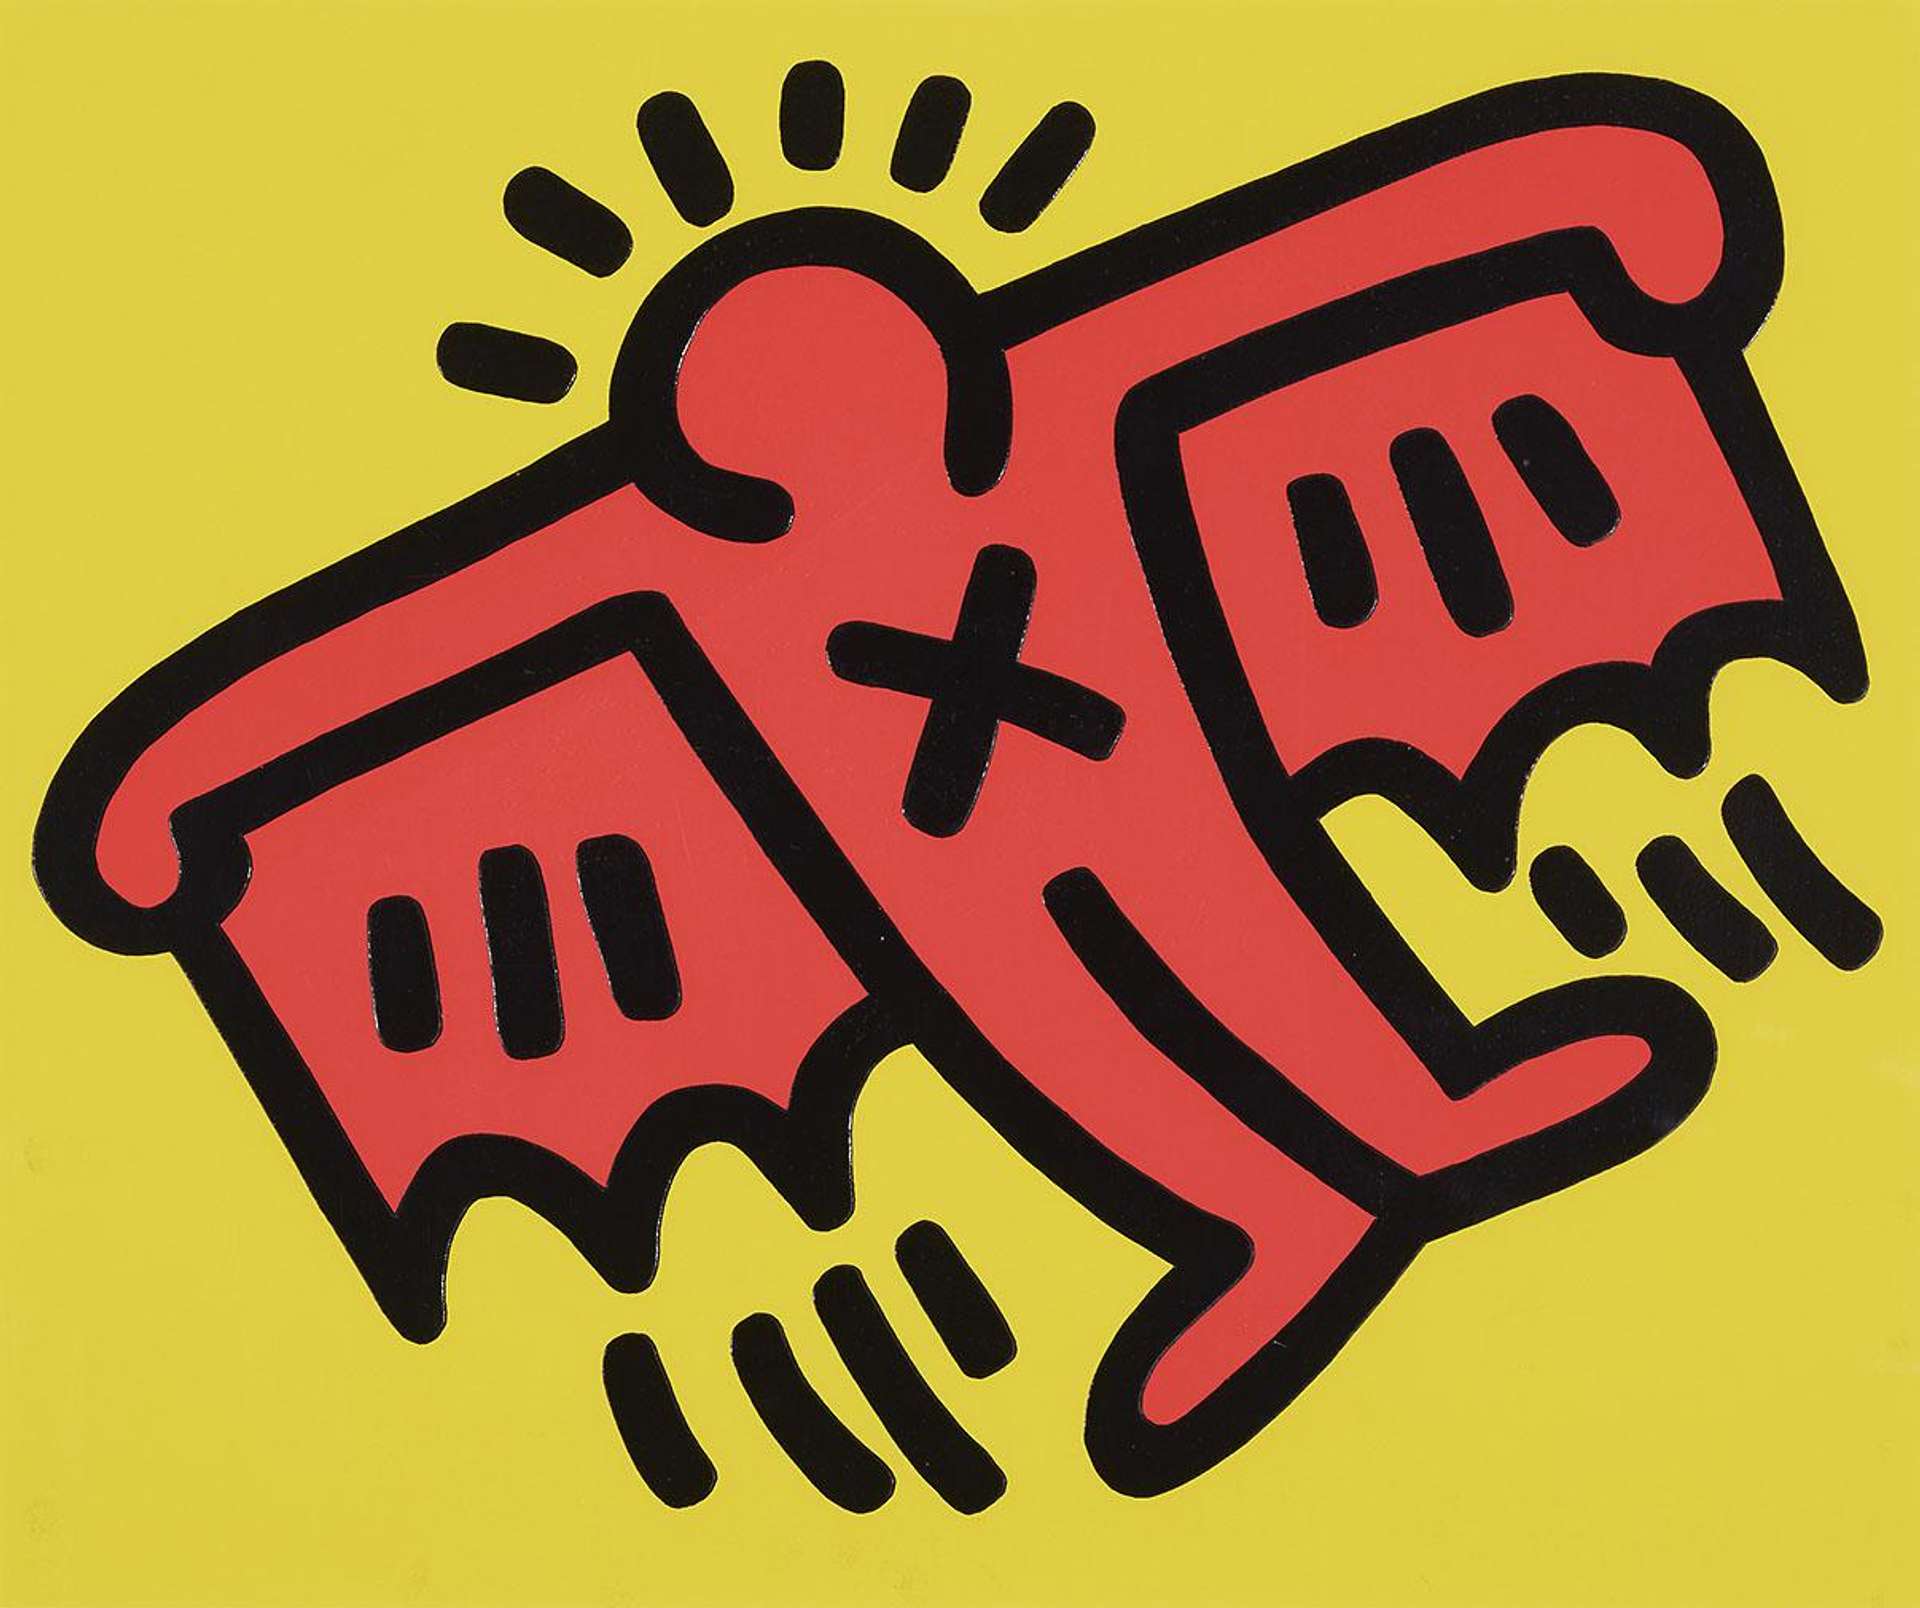 A screenprint by Keith Haring depicting a red cartoon man figure with wings and an ‘X’ across its chest, set against a bright yellow background.